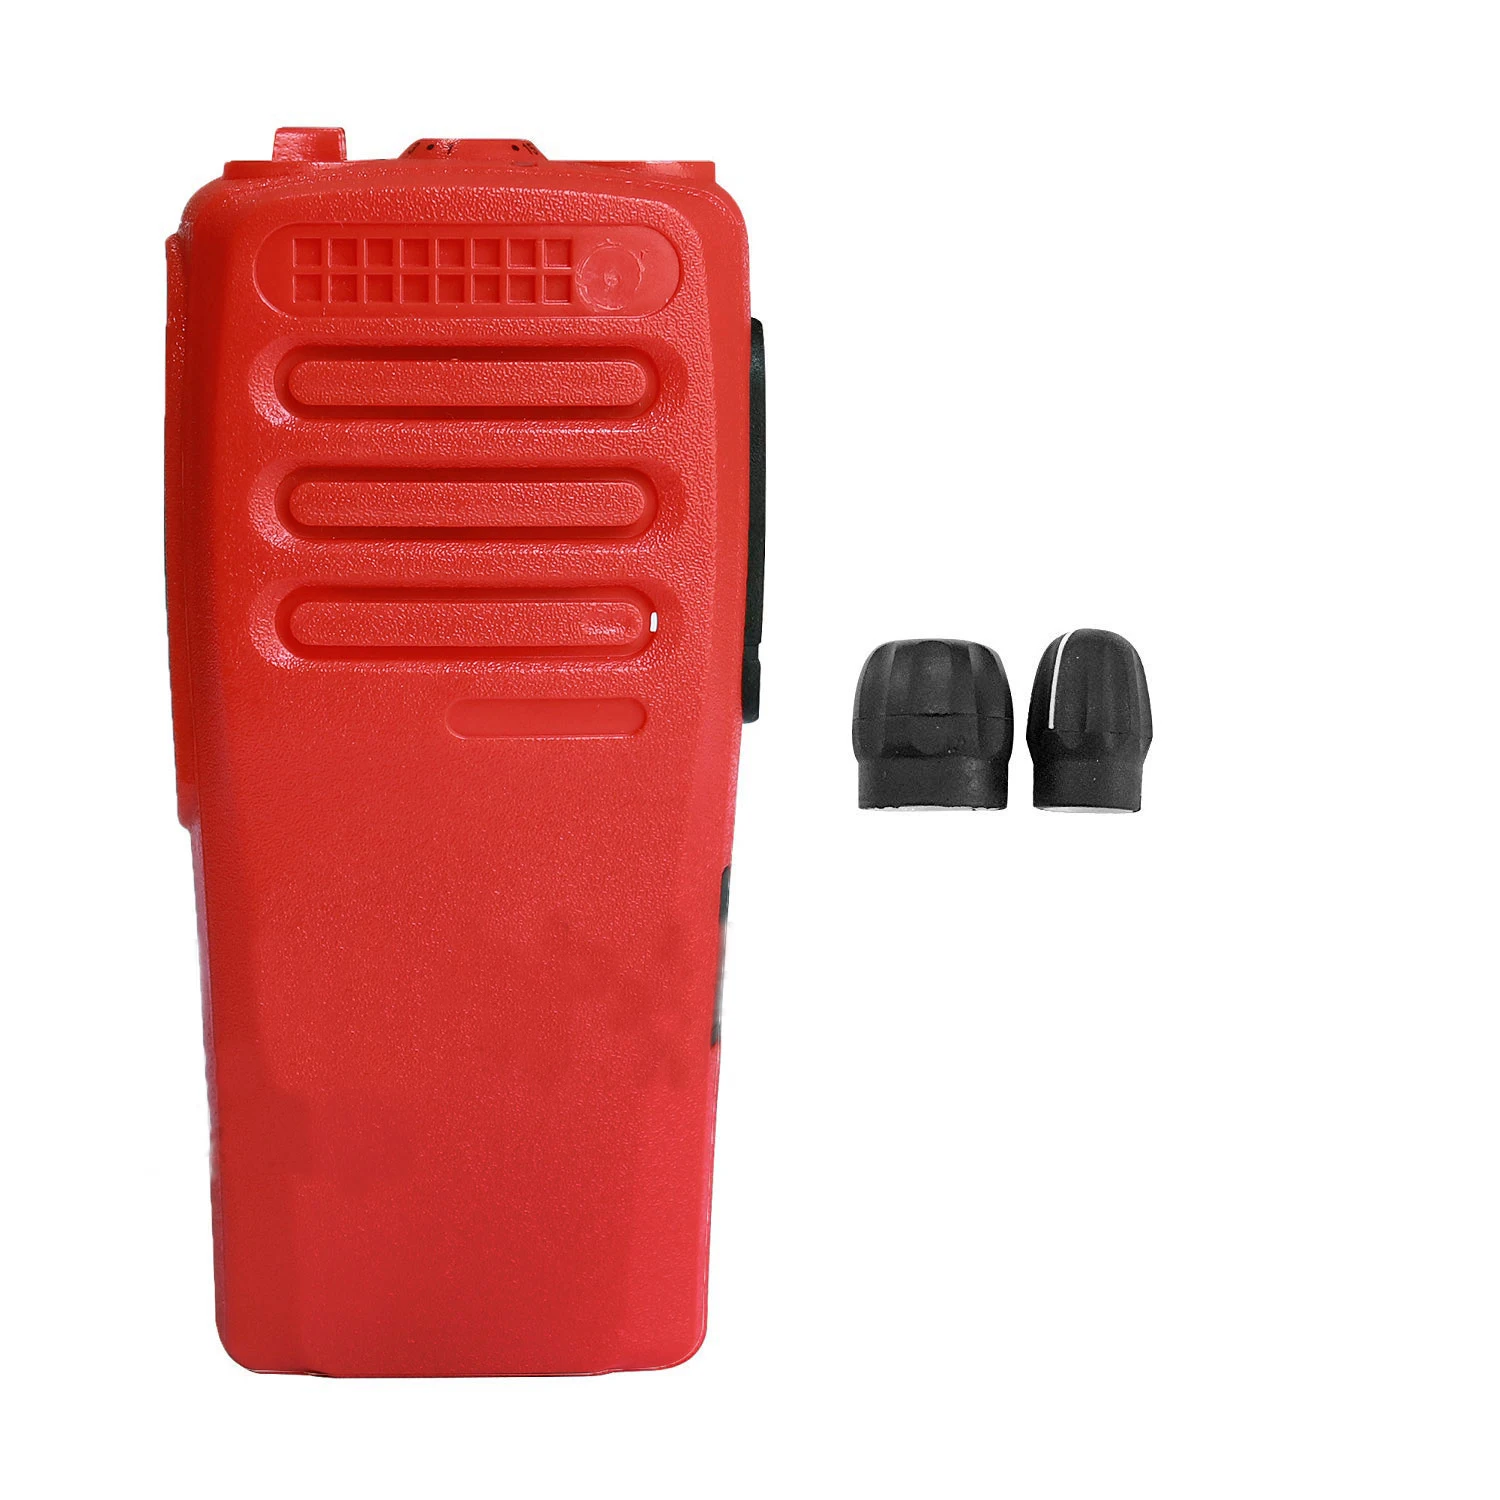 New Red Blue Front Cover Shell Housing Case Volume Channel Knob Cap For Motorola CP200D XIR P3688 Radio Walkie Talkie